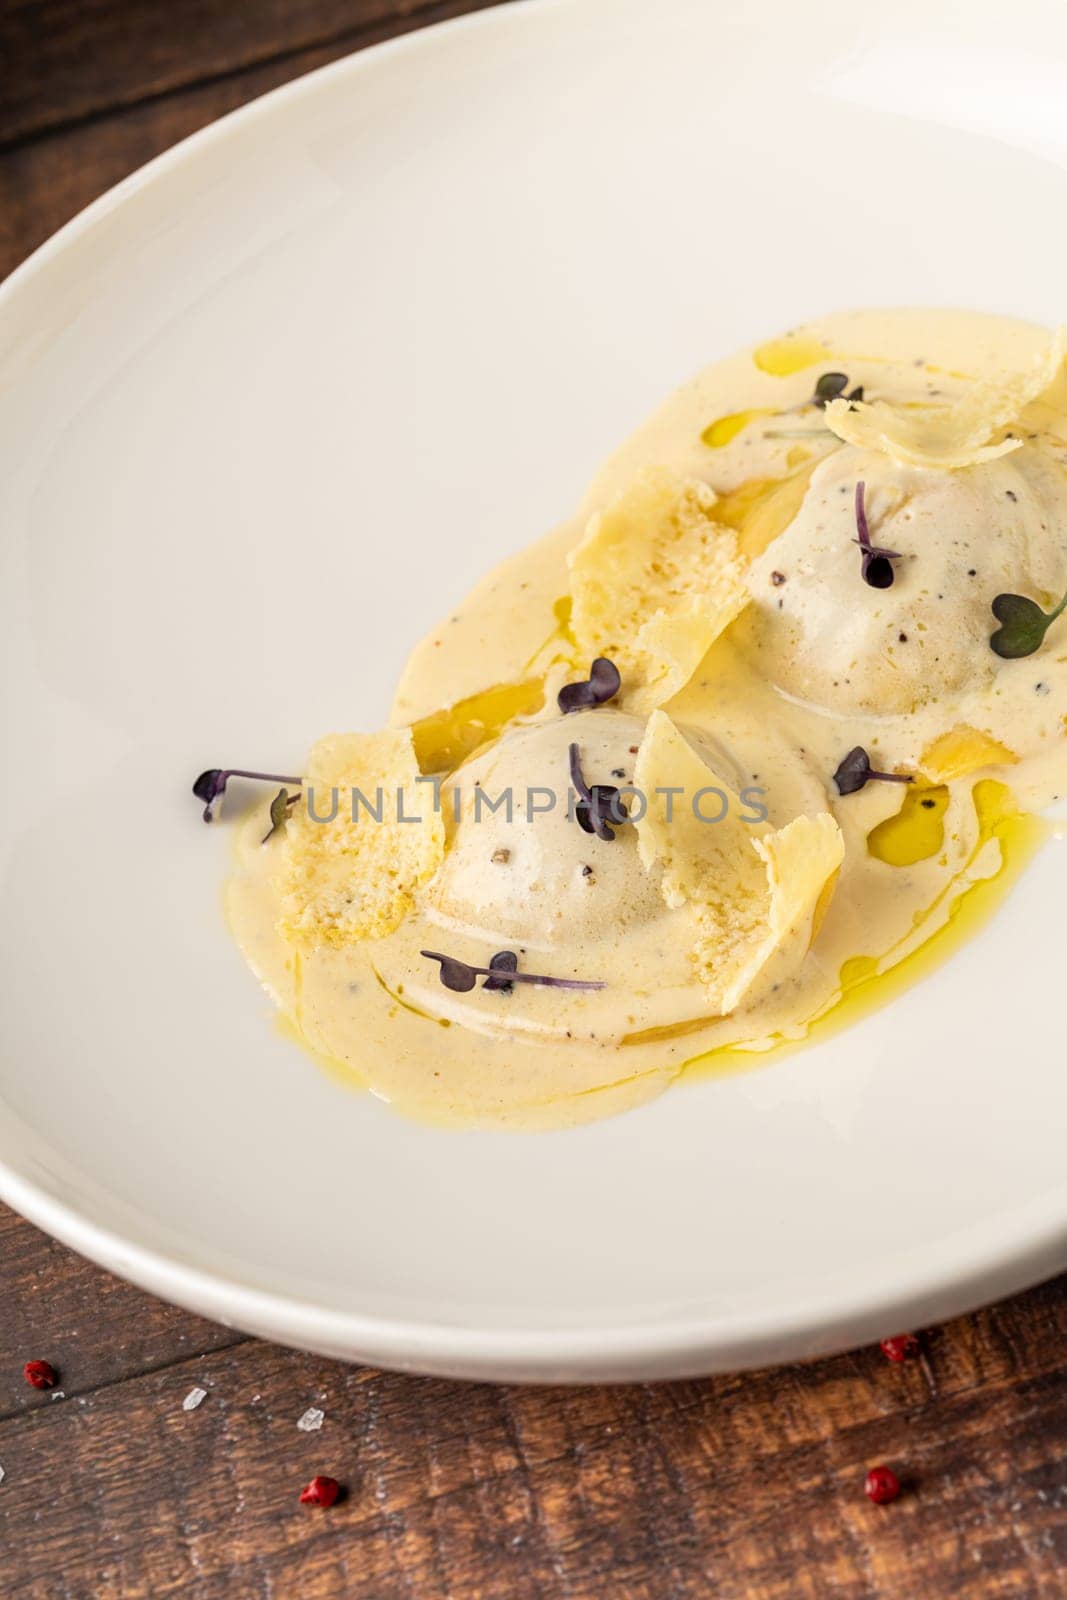 Cheese ravioli with sauces on a white porcelain plate by Sonat